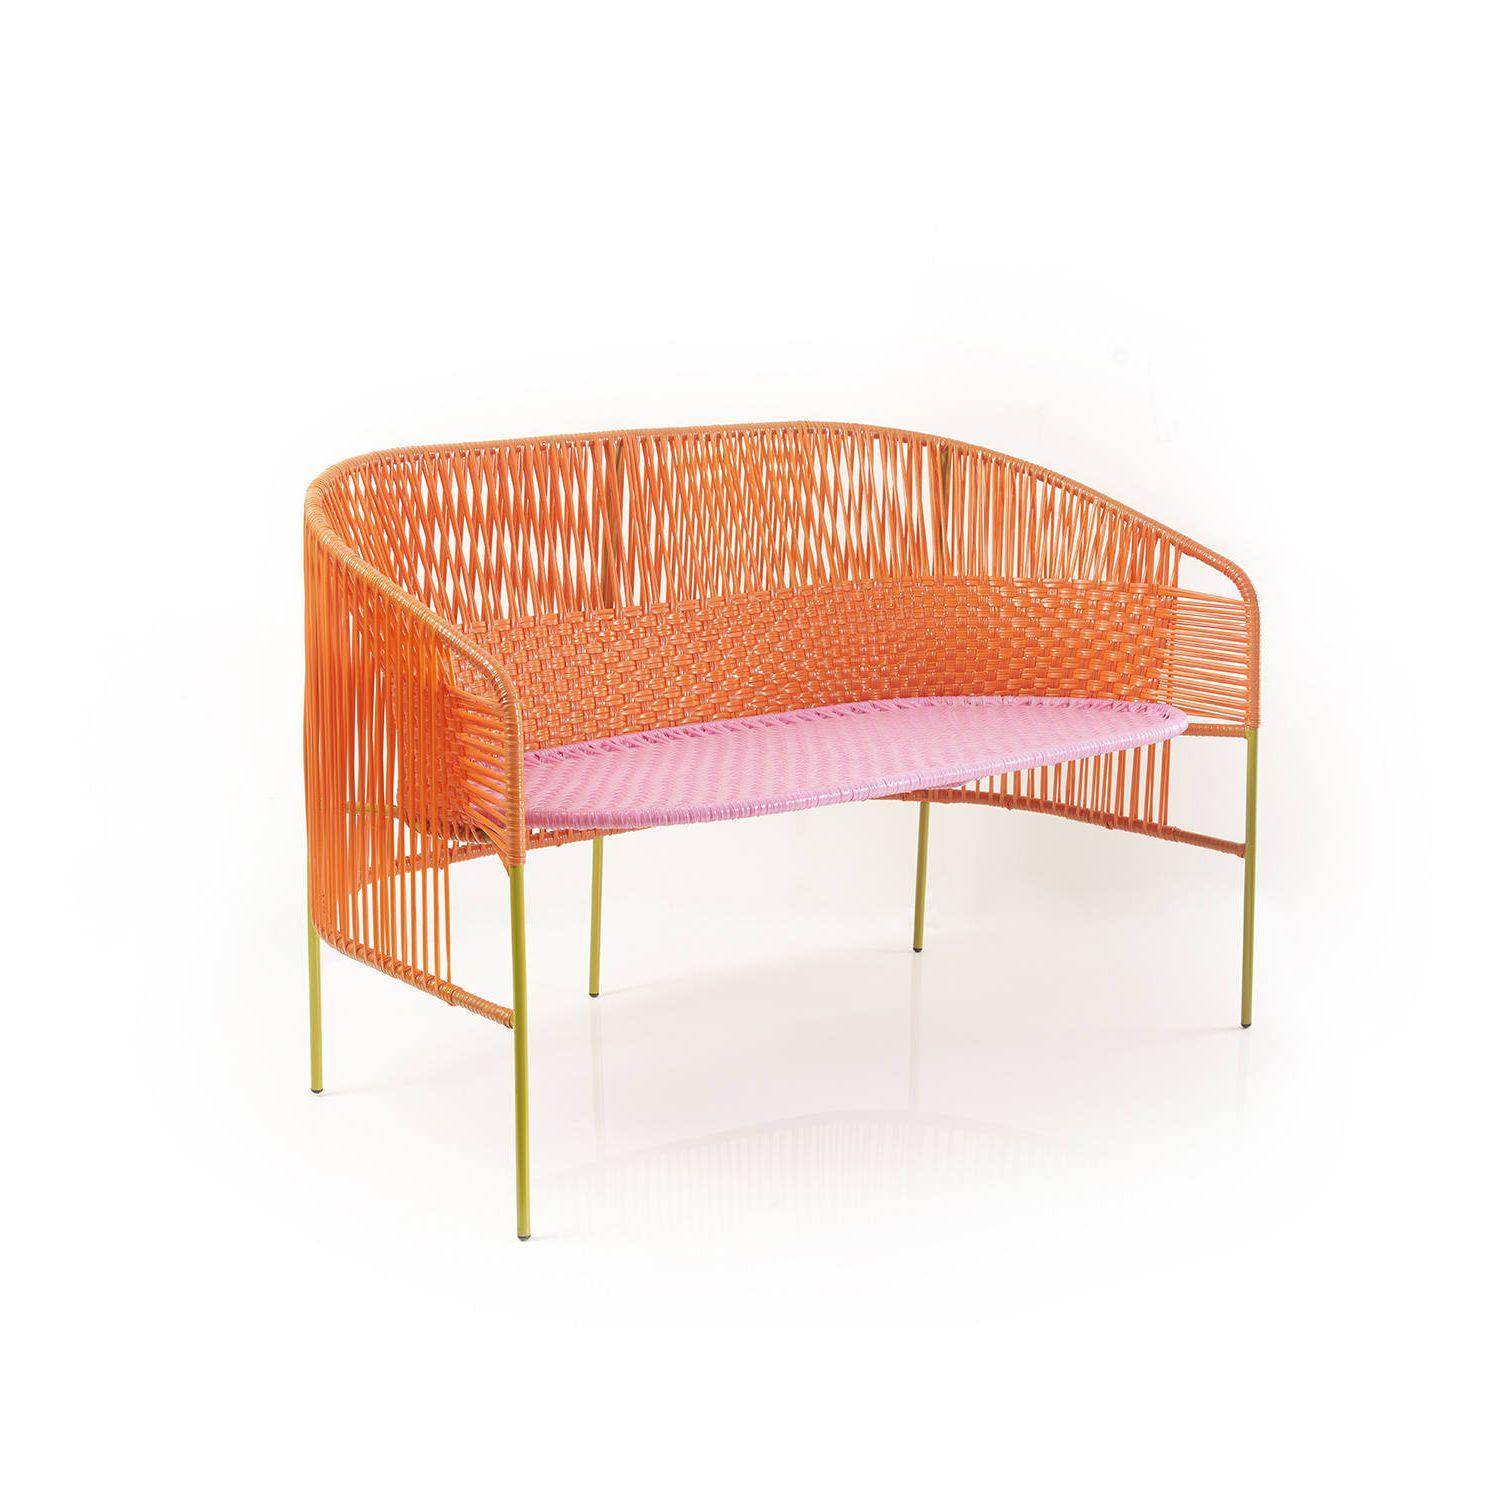 Orange caribe 2 seater bank by Sebastian Herkner
Materials: Galvanized and powder-coated tubular steel. PVC strings are made from recycled plastic.
Technique: Made from recycled plastic and weaved by local craftspeople in Colombia. 
Dimensions: W